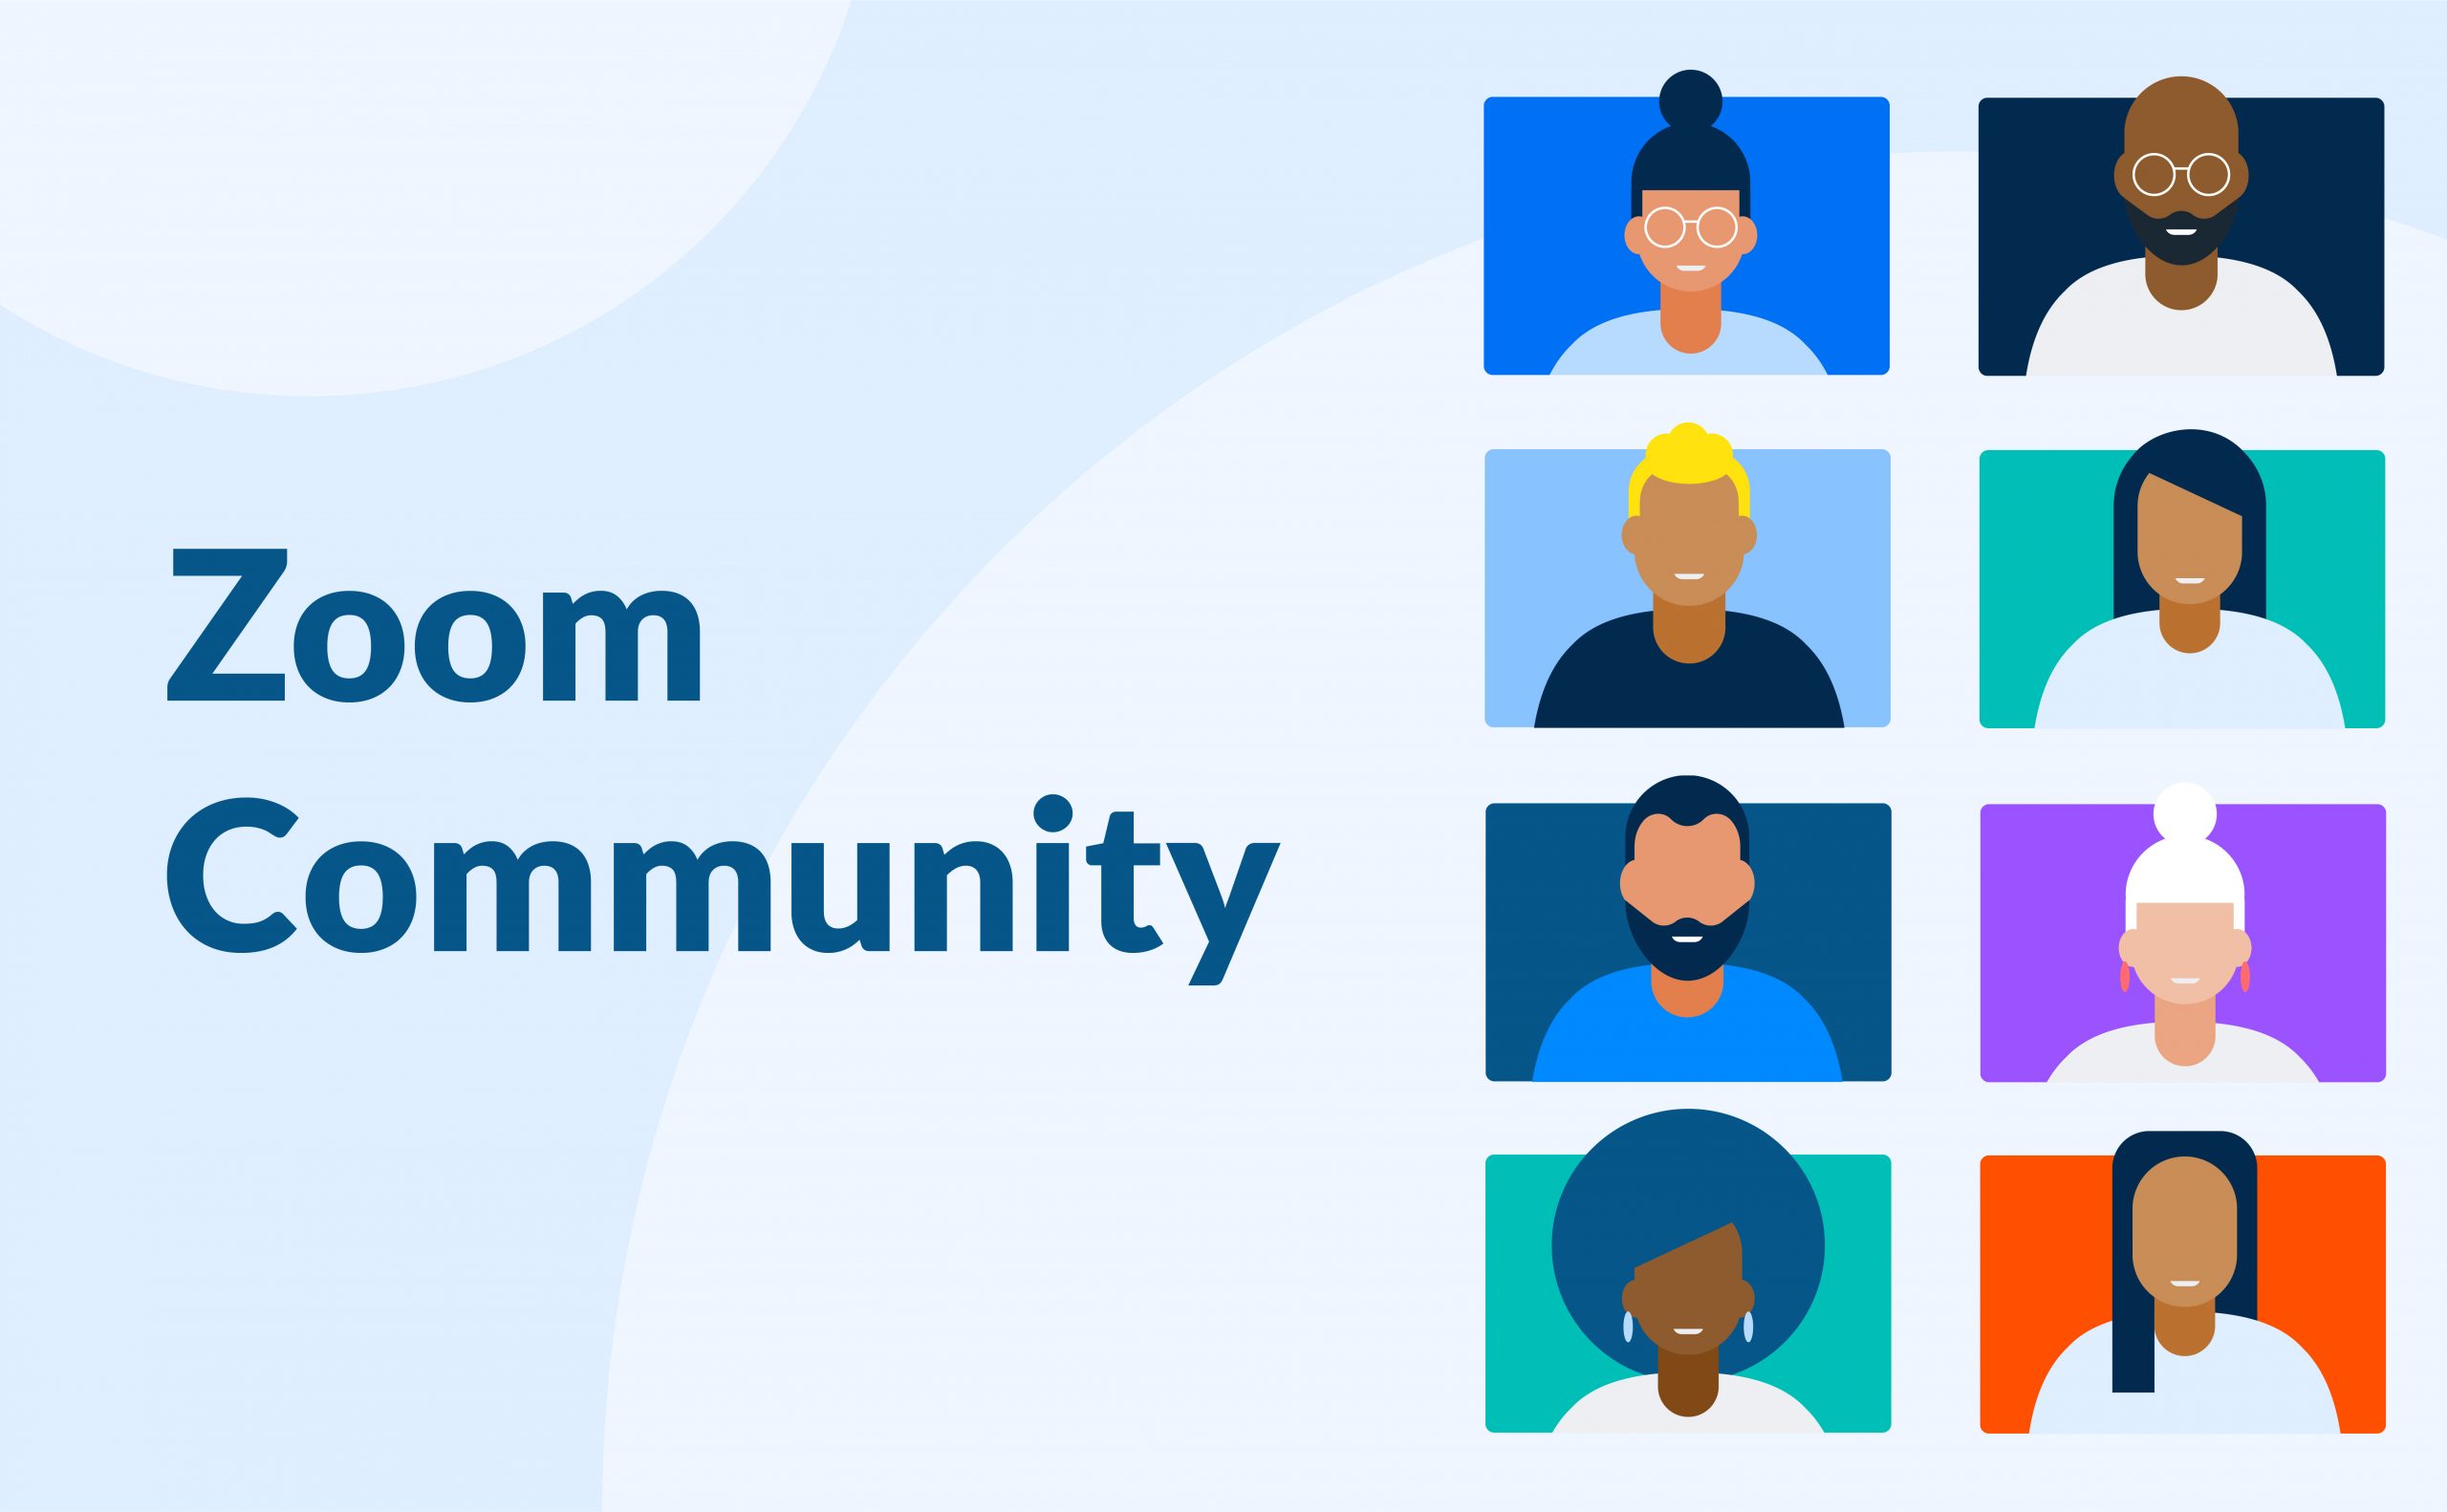 Introducing The Zoom Community!